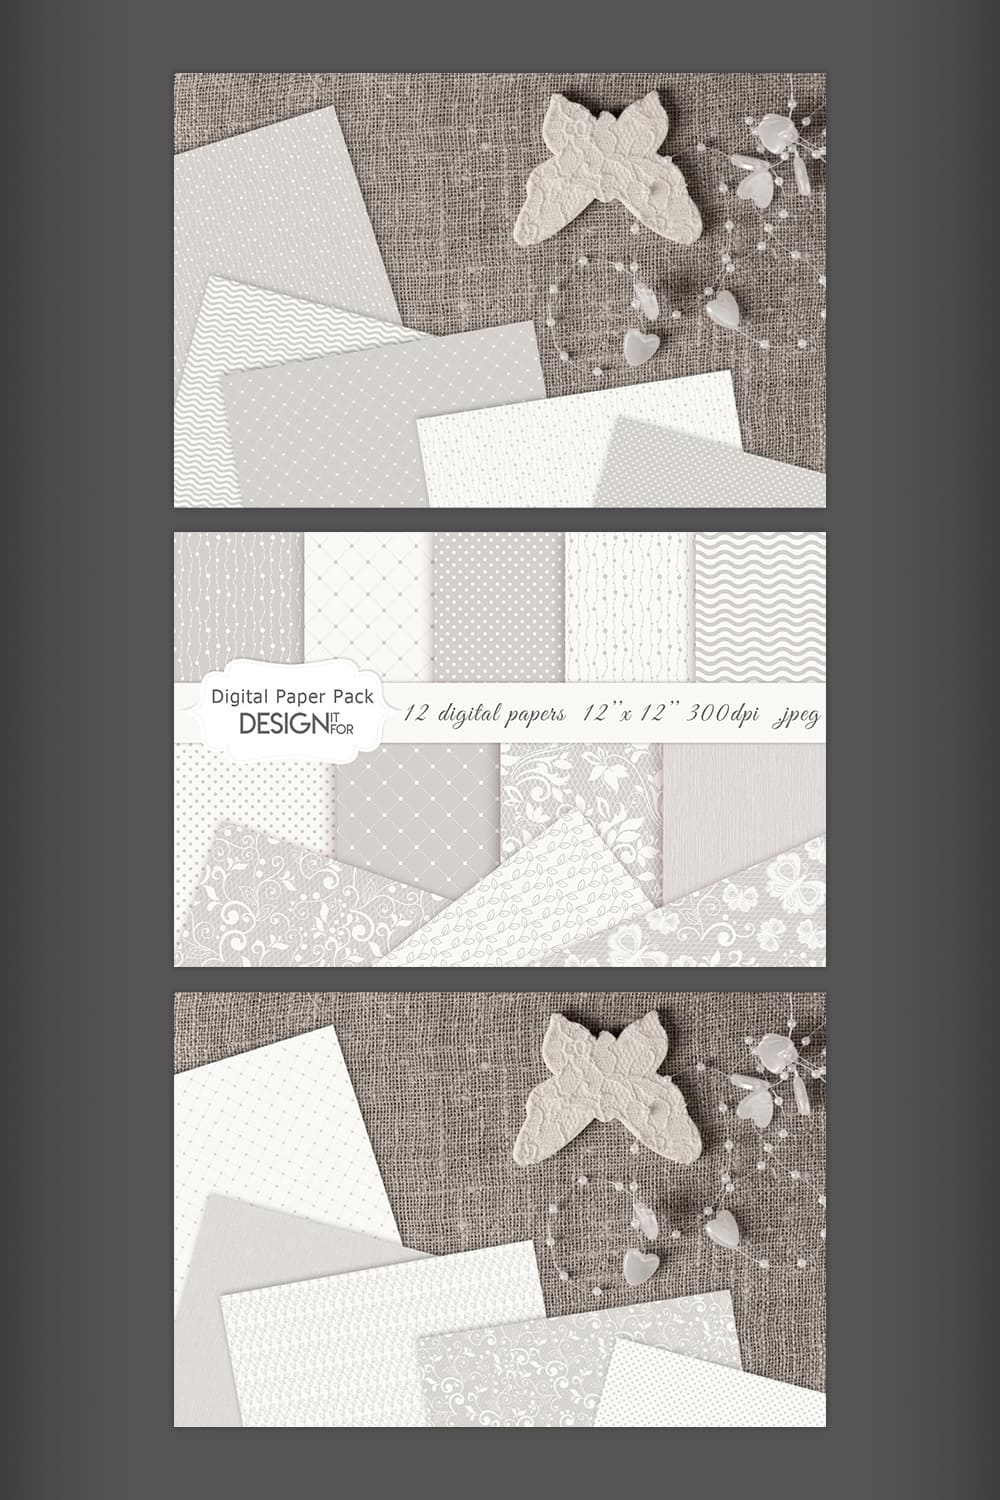 Wedding Digital Paper Pack, Wedding Patterns, Lace Papers.